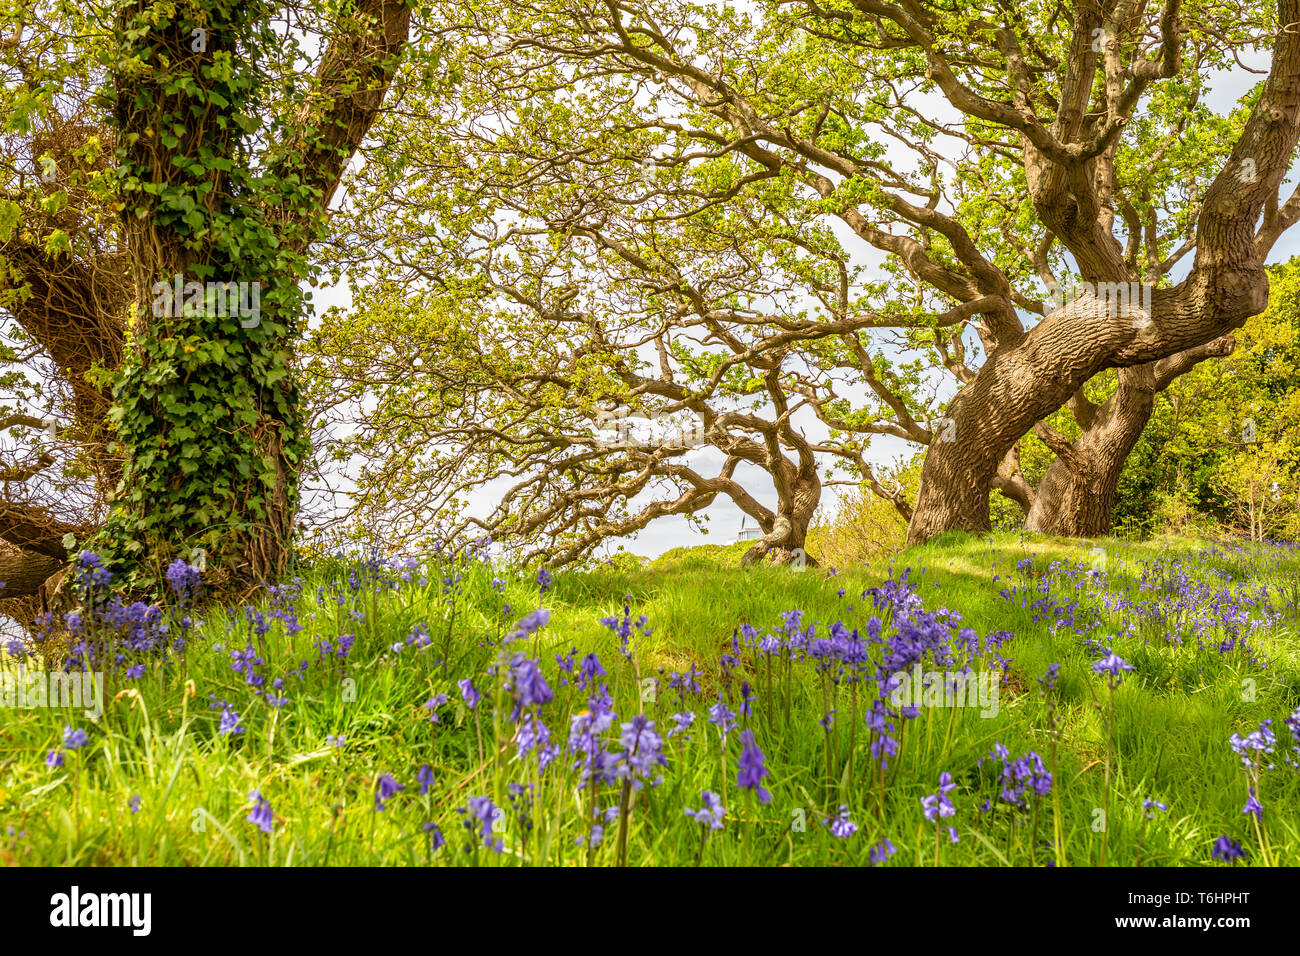 Colour landscape photograph of carpet of spanish bluebells out of focus in bloom under windswept trees in background, Taken in Poole, Dorset, England. Stock Photo